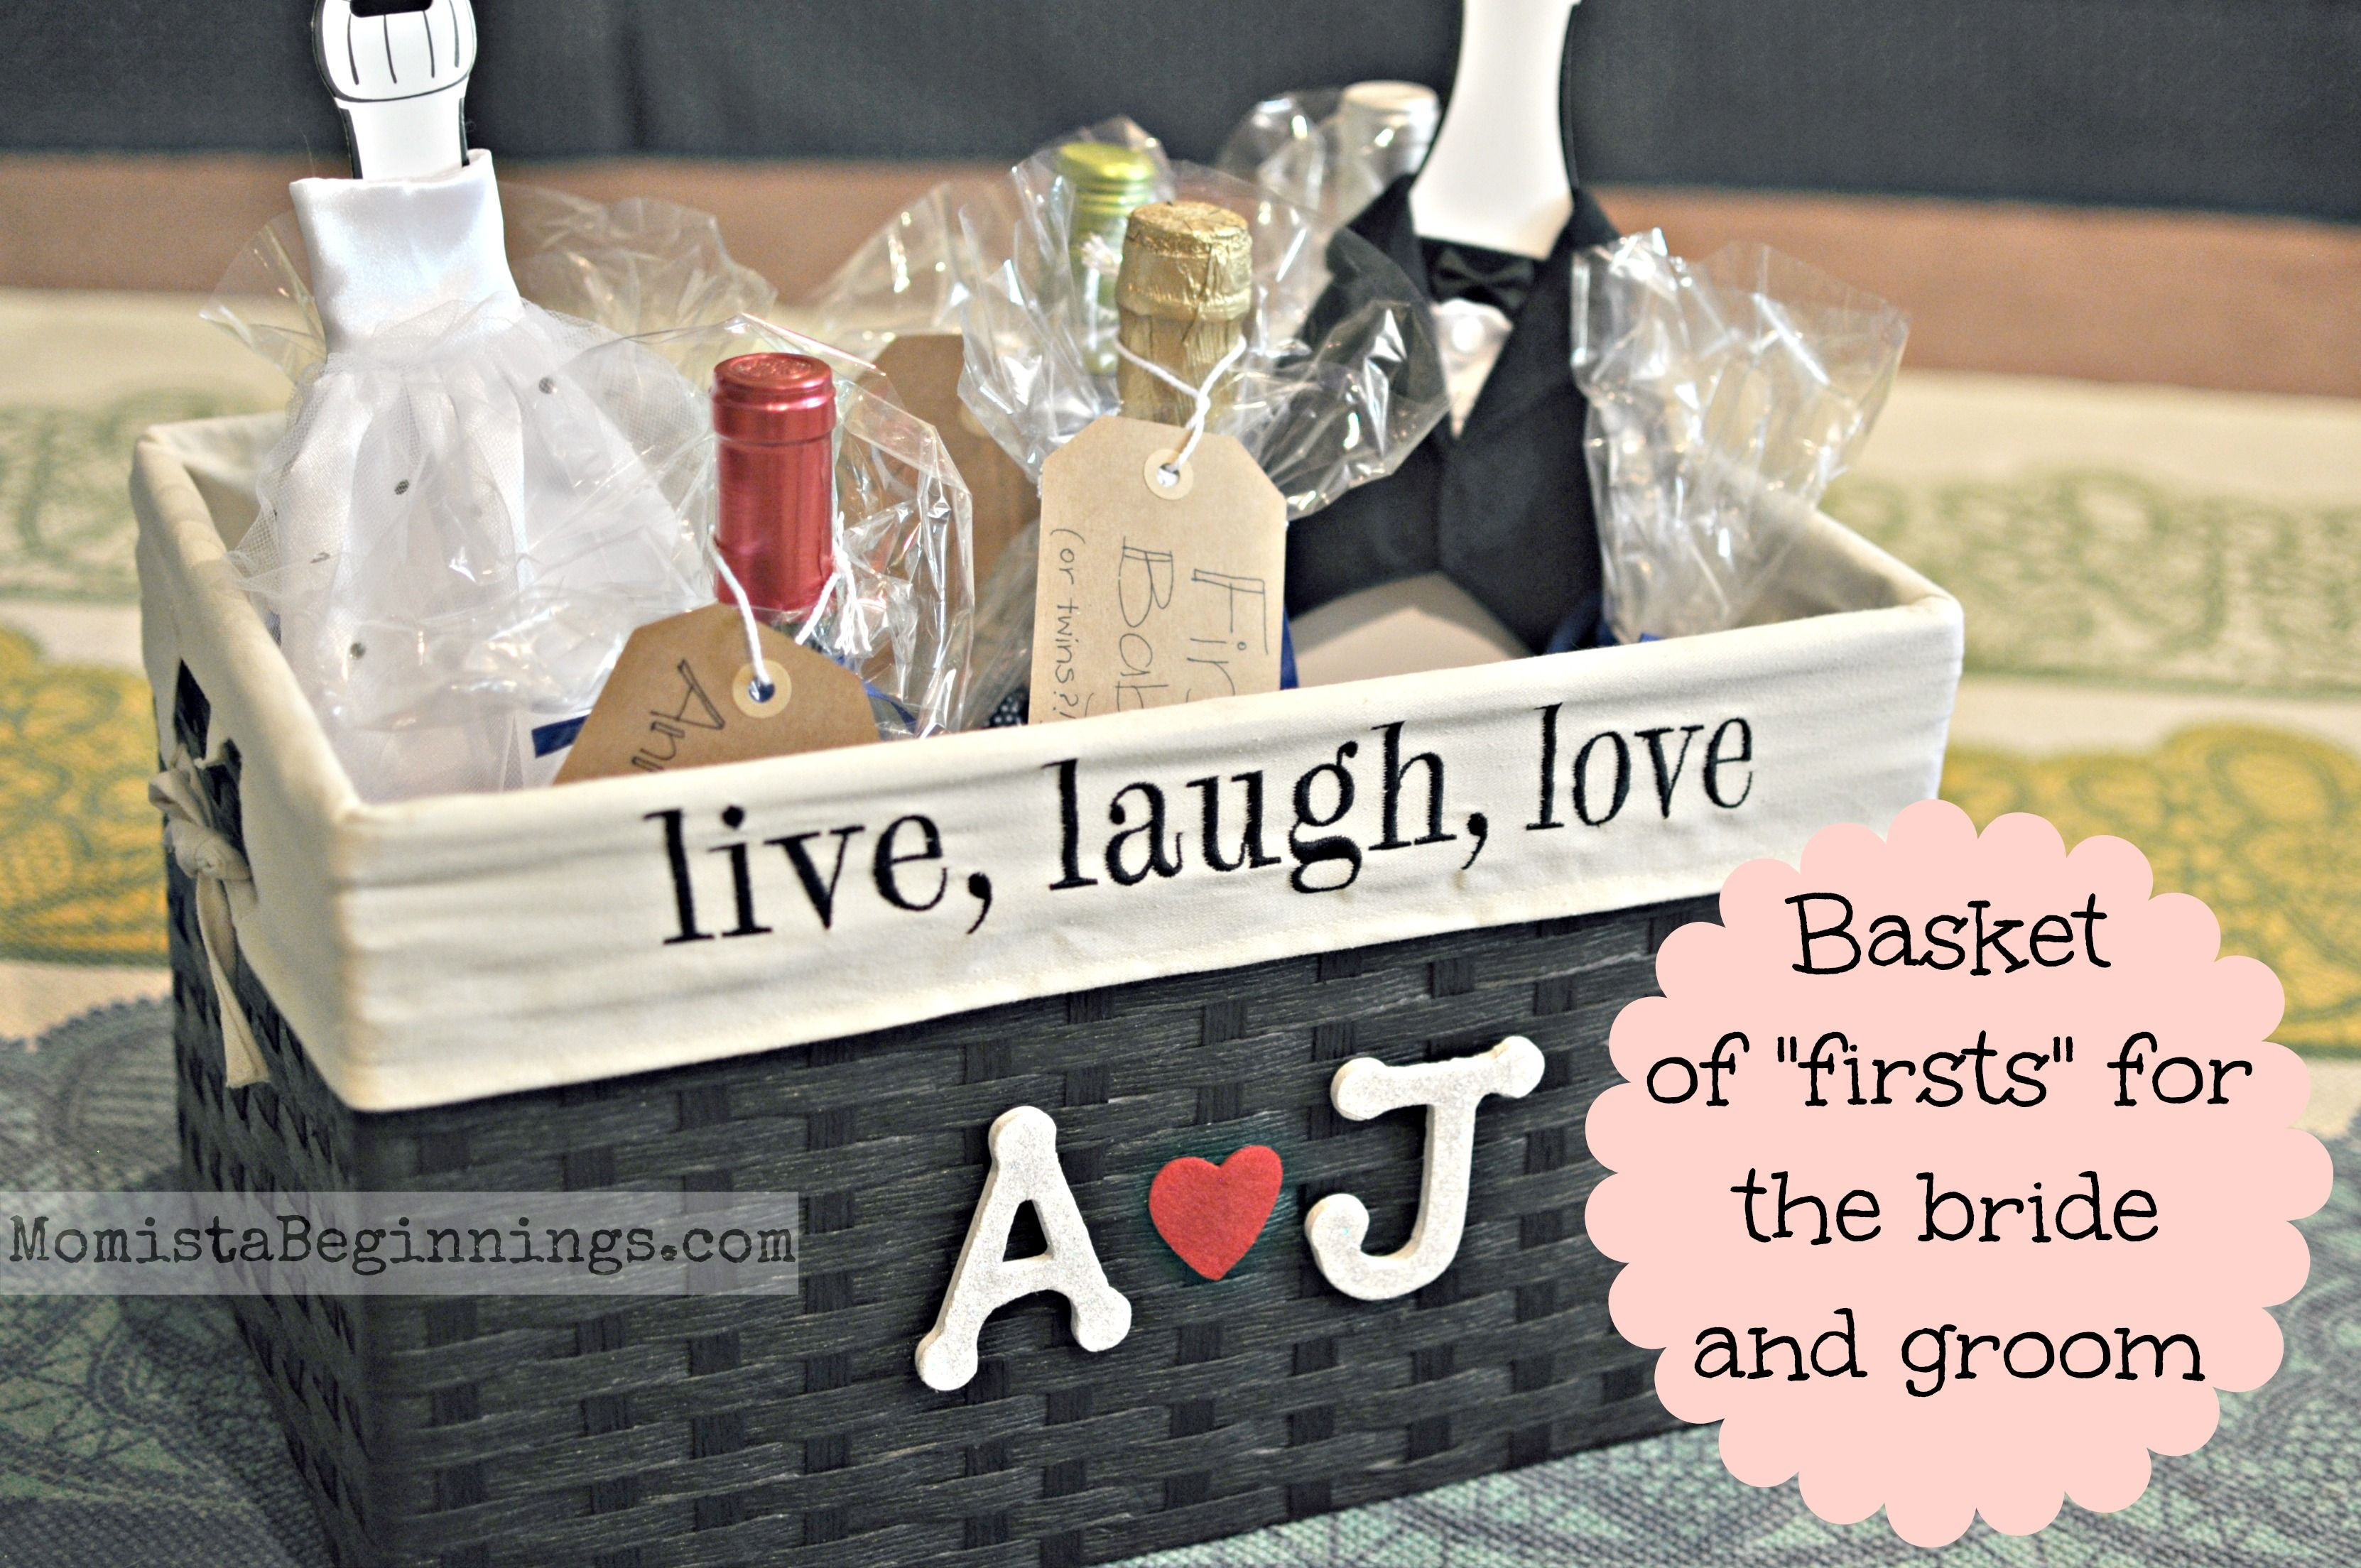 Wedding Gift Ideas For Bride And Groom
 Basket of "firsts" bridal shower t This idea includes